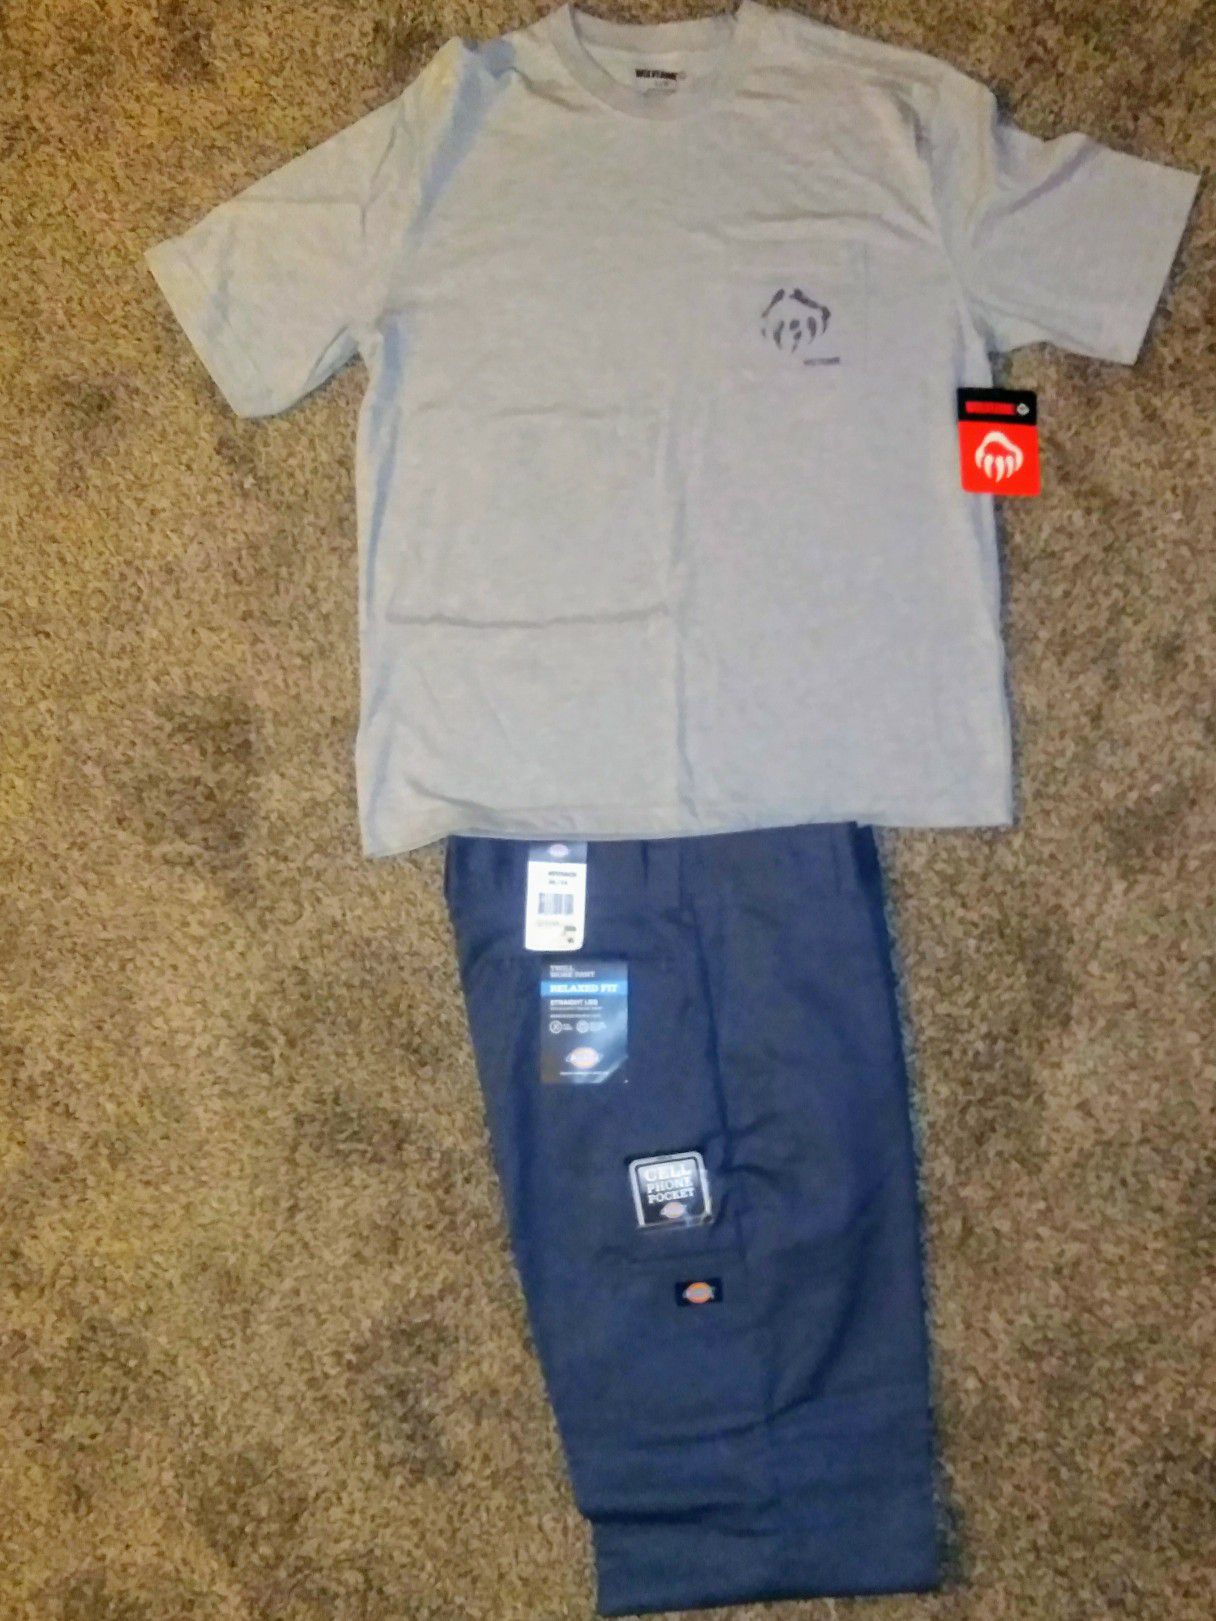 Brand new pants 36 x34 and T-shirt Large Z. $30 for both